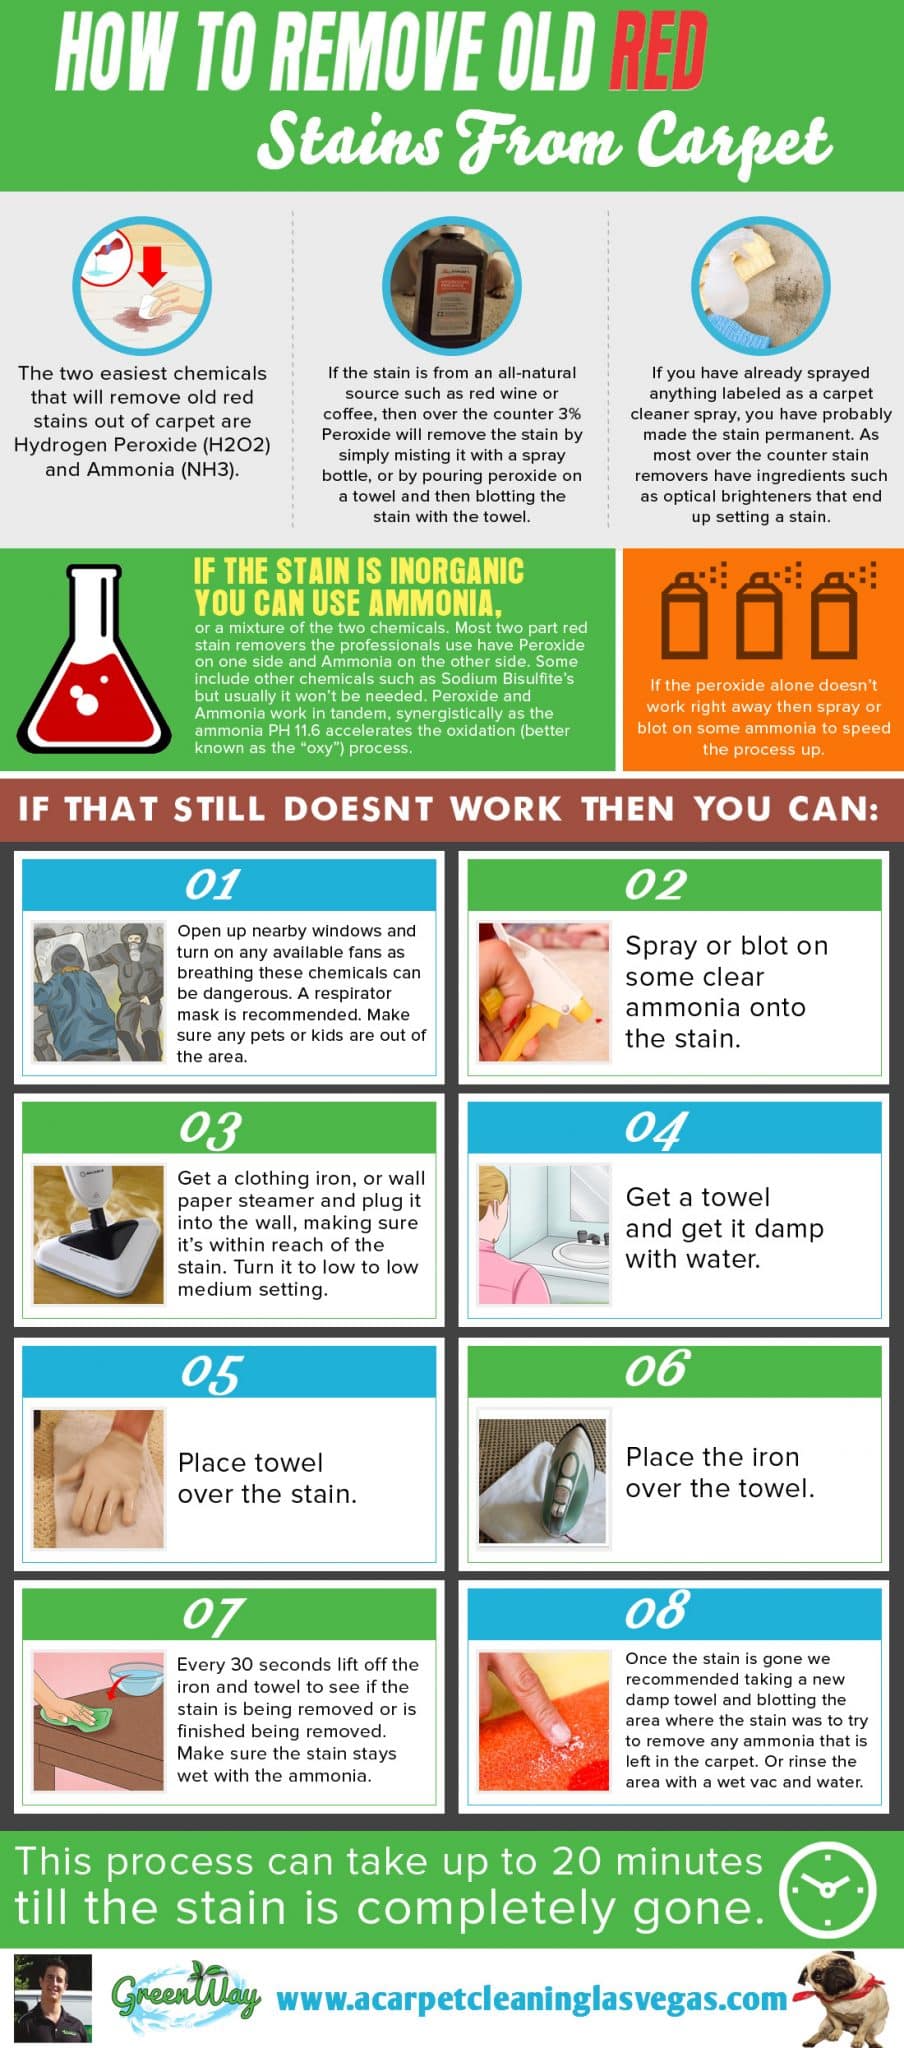 https://acarpetcleaninglasvegas.com/wp-content/uploads/2017/09/How-to-Remove-old-Red-stains-from-carpet-1.jpg